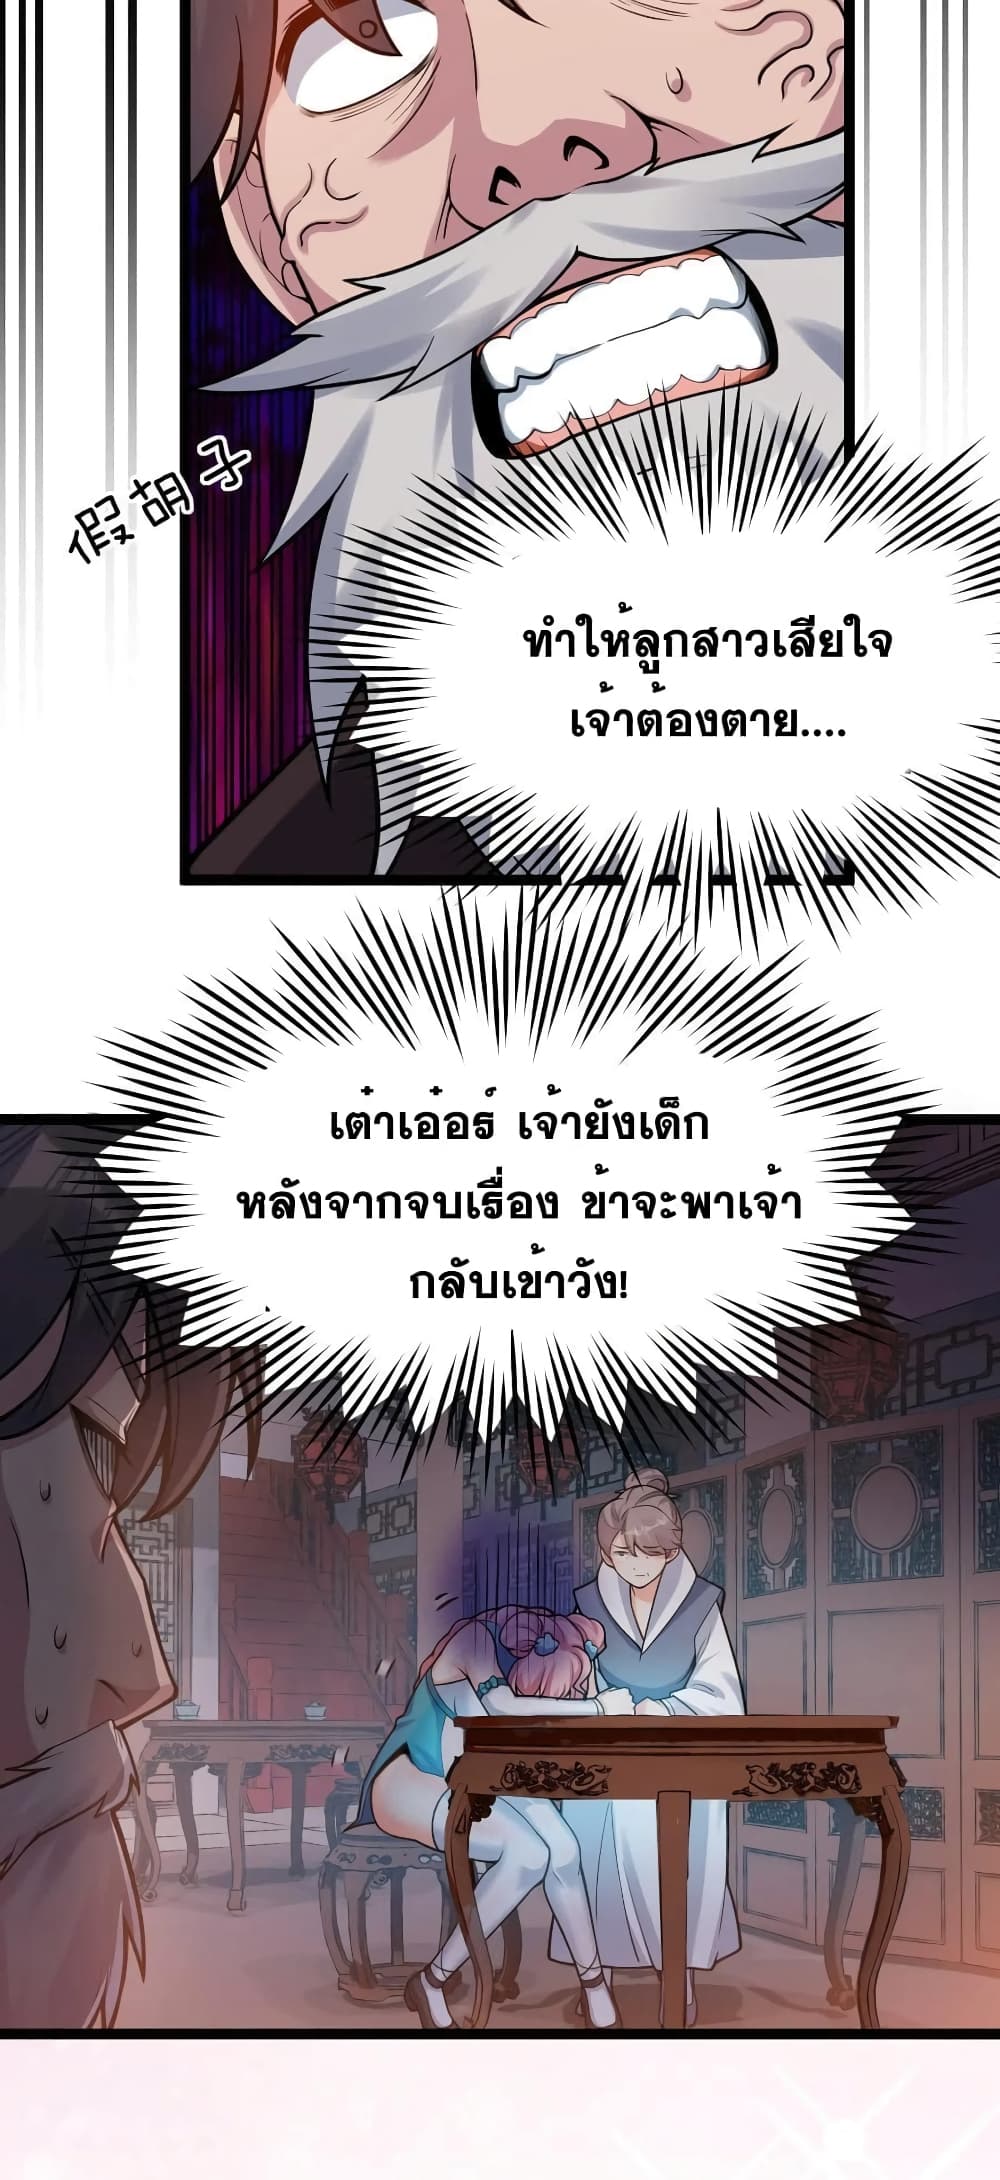 Godsian Masian from Another World ตอนที่ 110 (30)